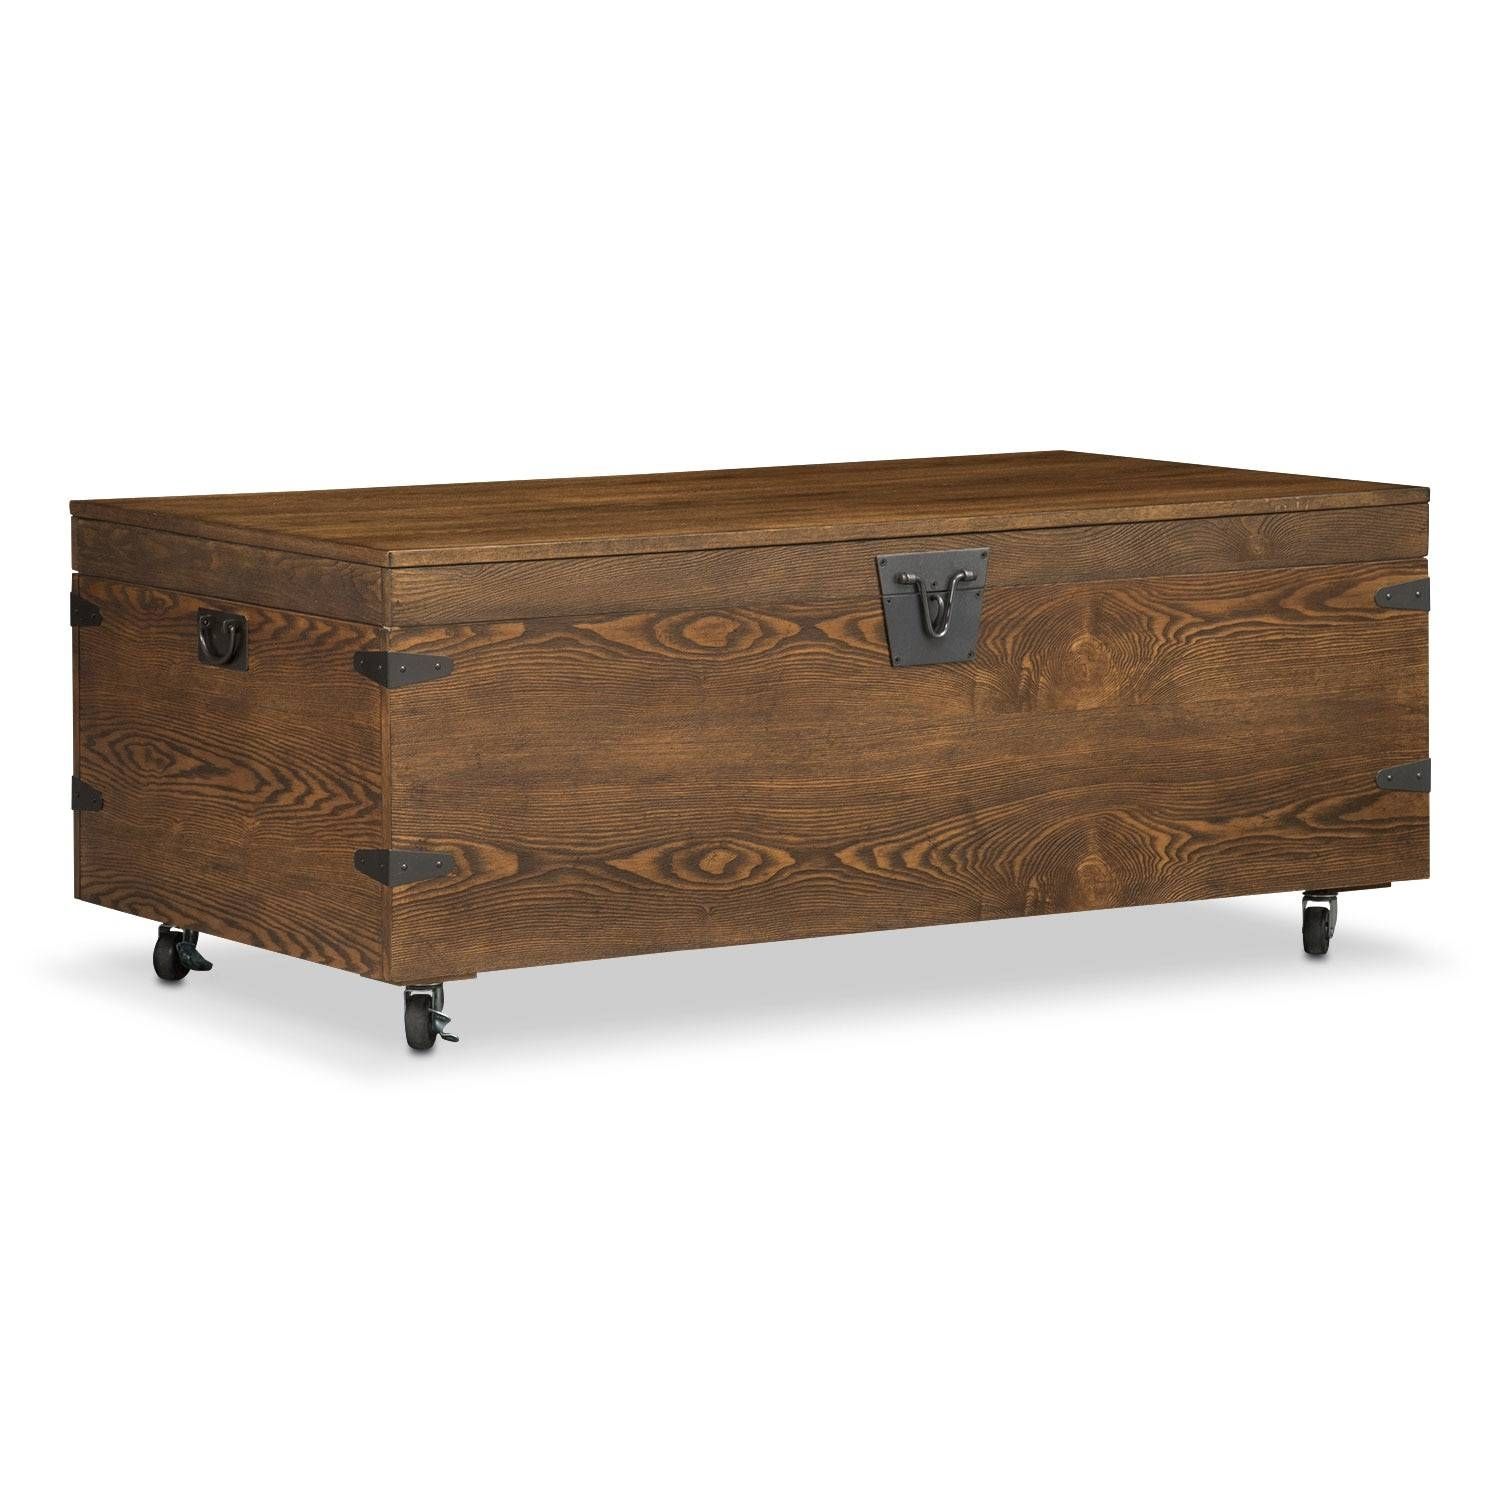 Coffee Tables | Living Room Tables | Value City Furniture With Regard To Silver Trunk Coffee Tables (View 21 of 30)